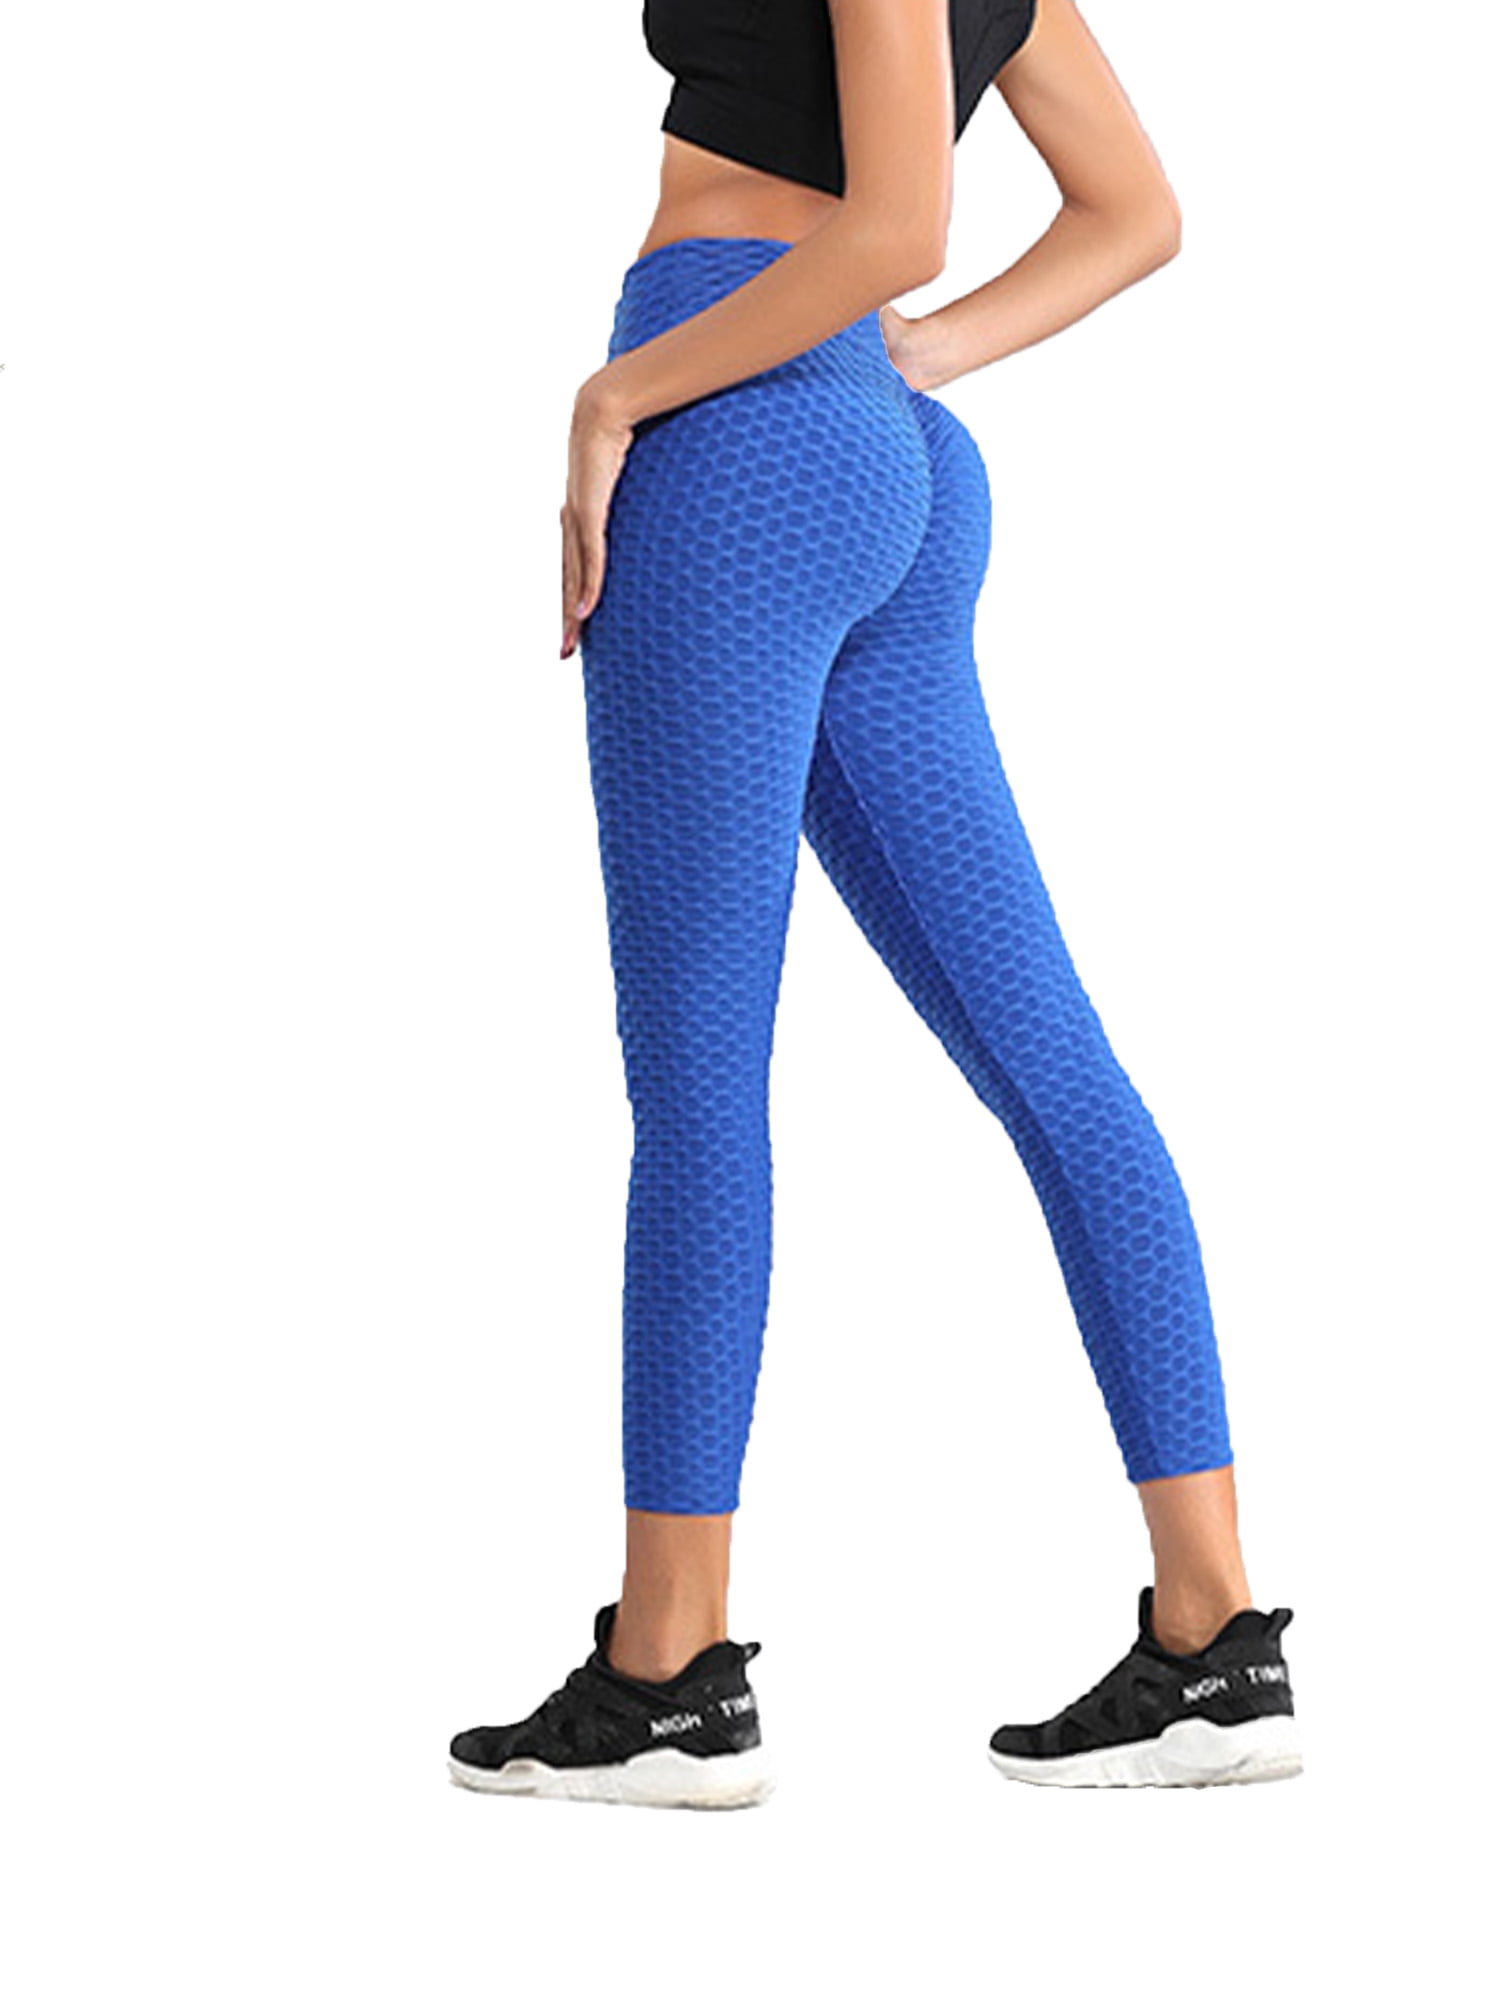 Women Yoga Pants Leggings High Waist Push Up Anti Cellulite Ruched Trousers Gym 